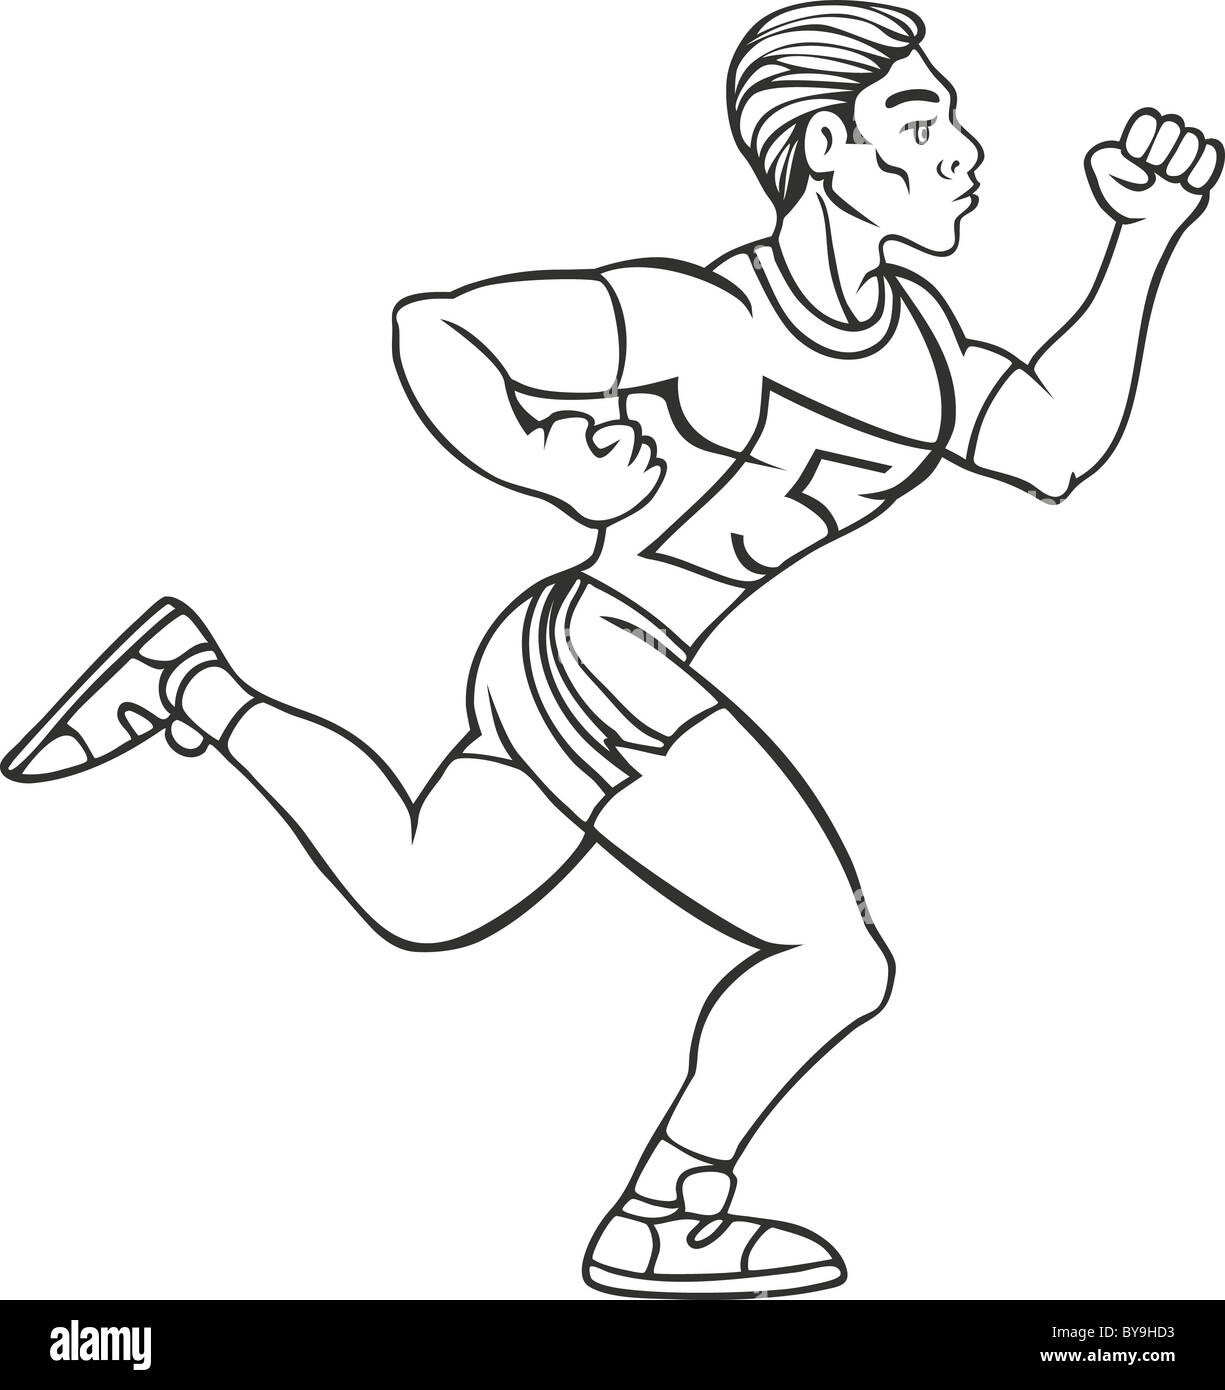 Cartoon drawing of a man running in a race isolated on a white background  Stock Photo - Alamy